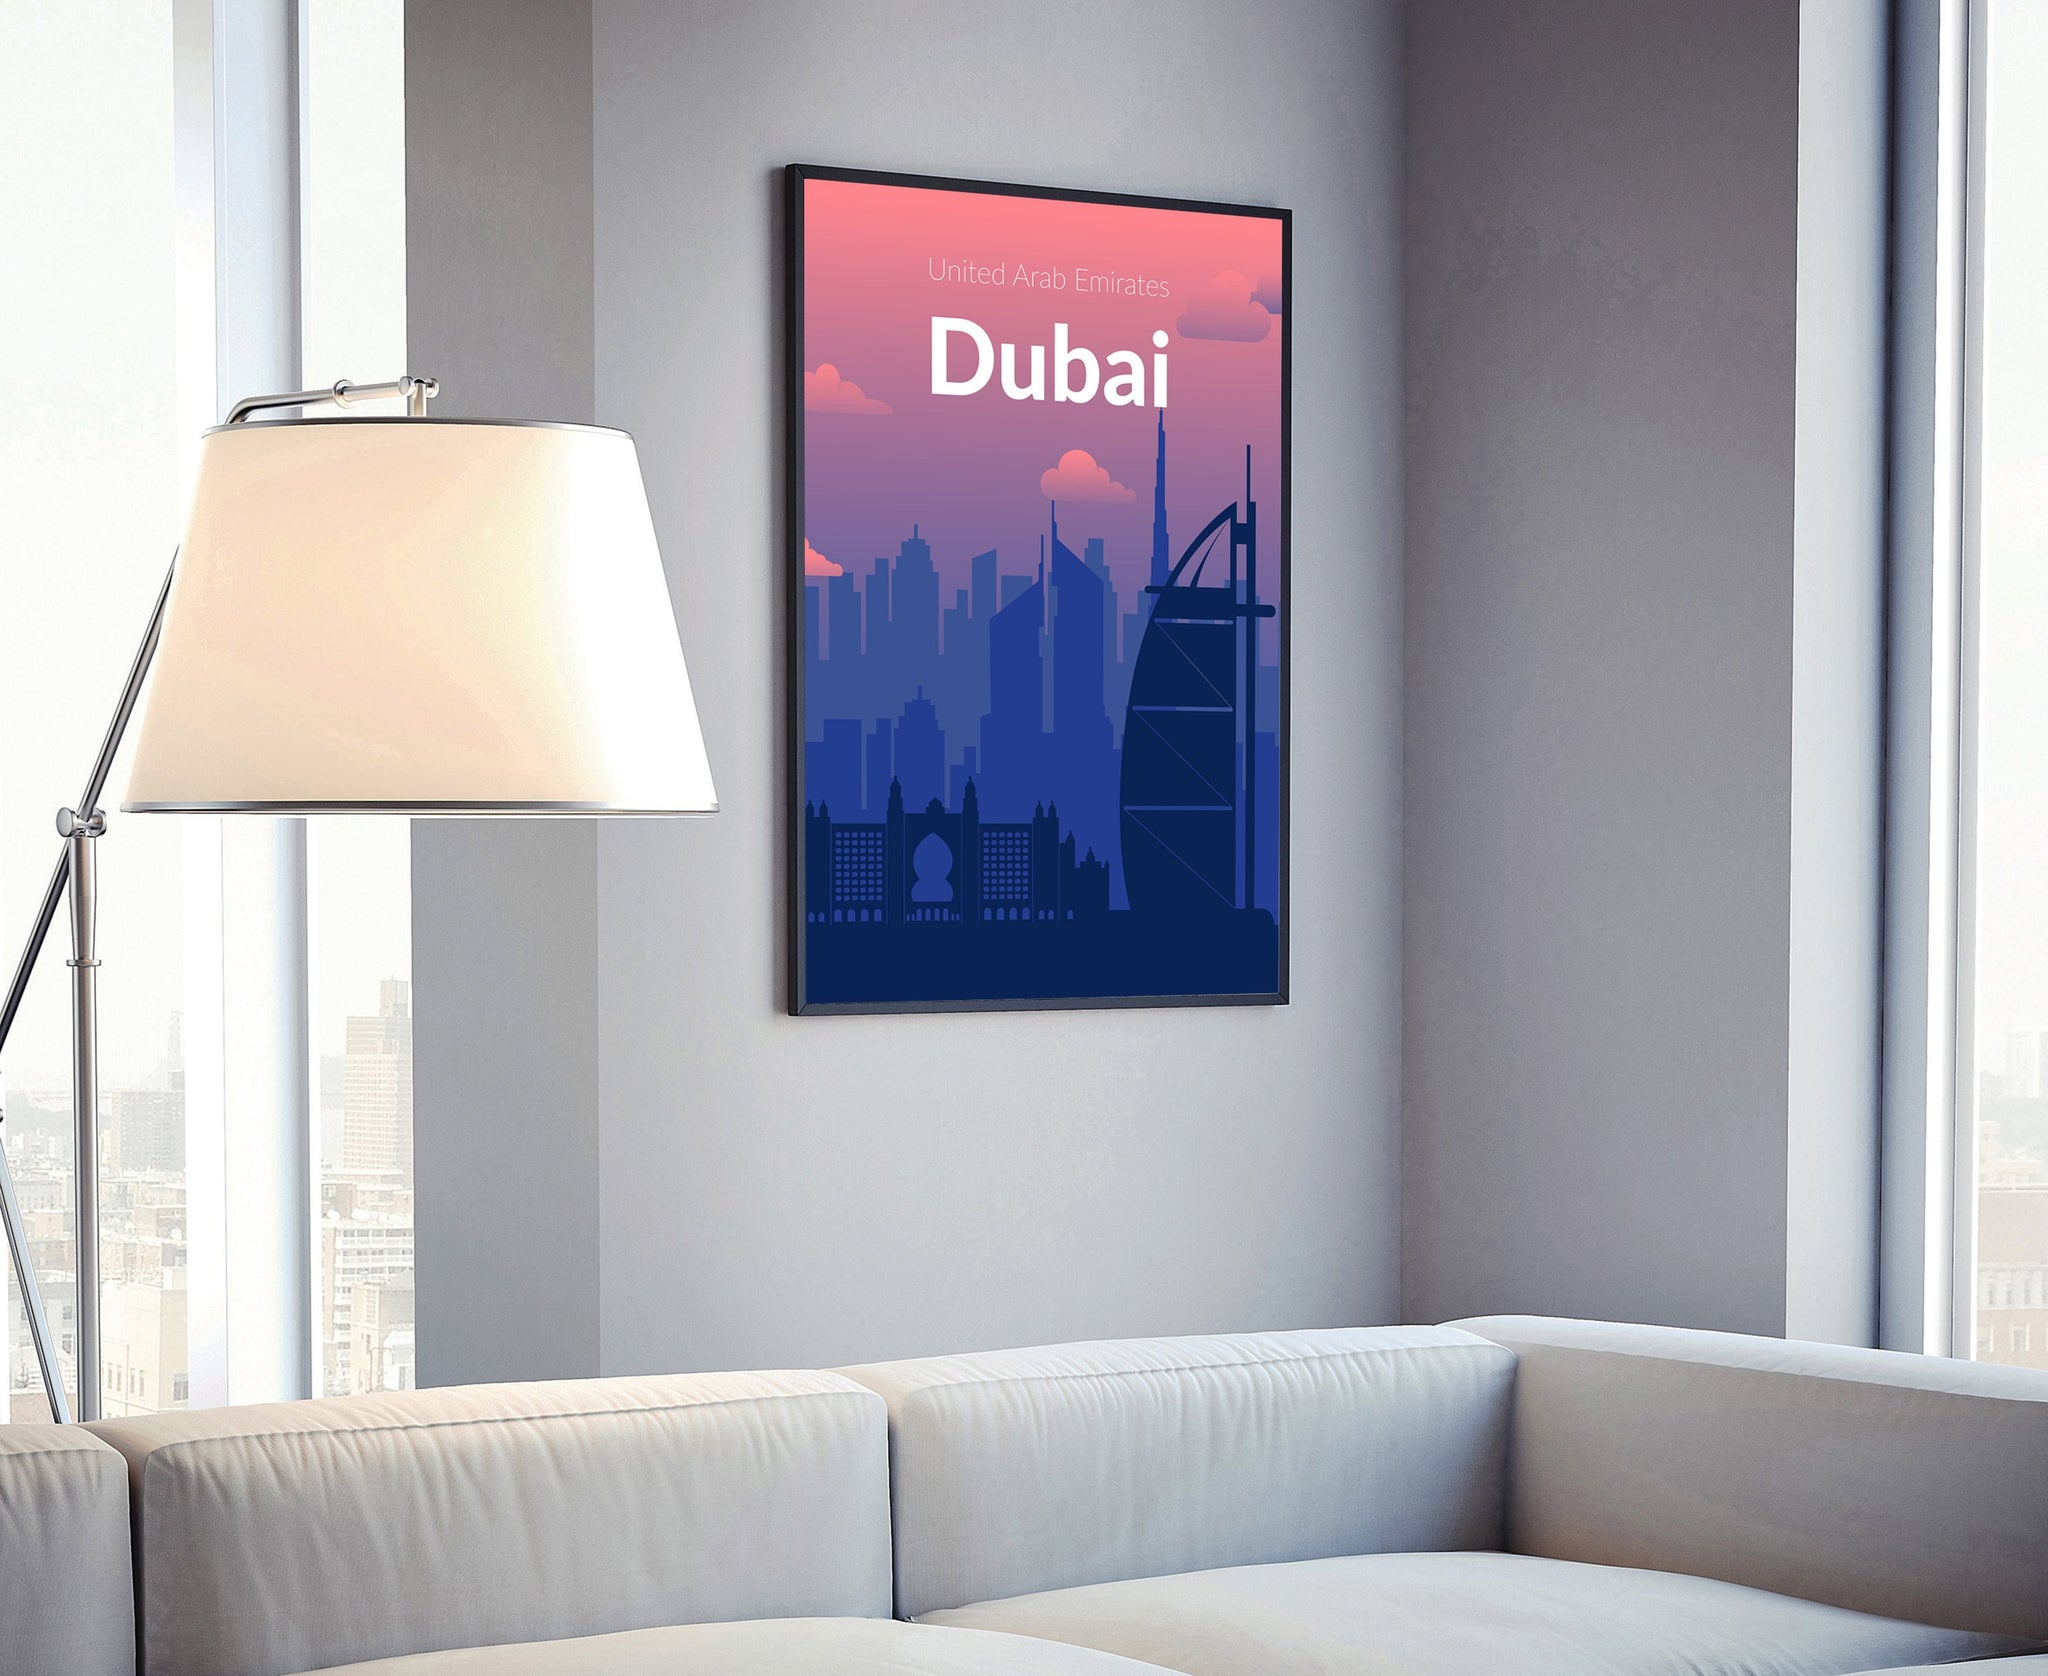 Solid Color World City Poster, United Arab Emirates Dubai Solid Color Modern Poster Print, Dubai Modern City Poster, Office Wall Decoration